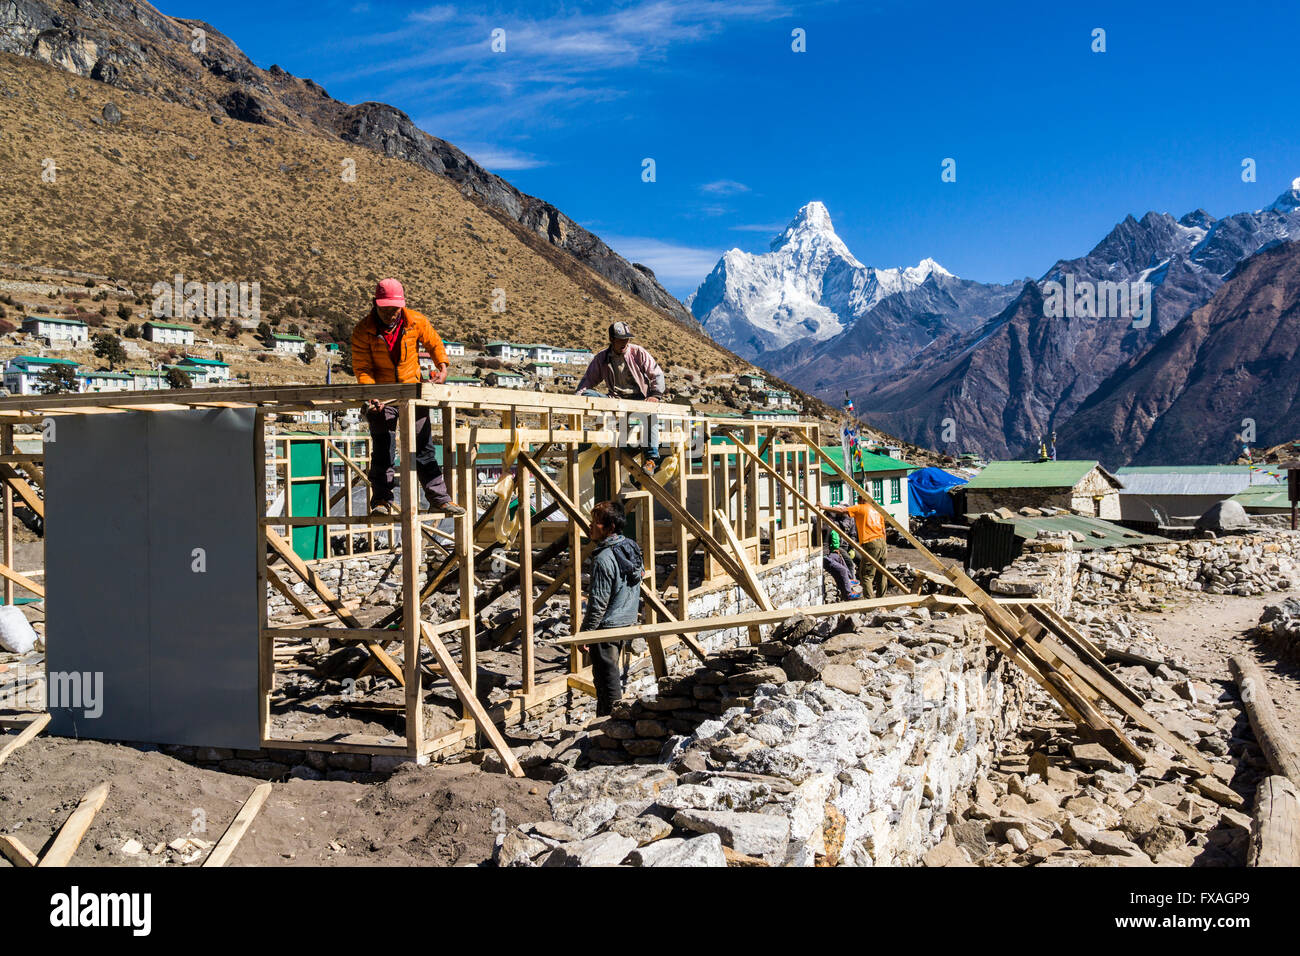 Reconstruction of the houses destroyed by the earthquake in 2015, Ama Dablam (6856m) mountain in the distance, Khumjung Stock Photo